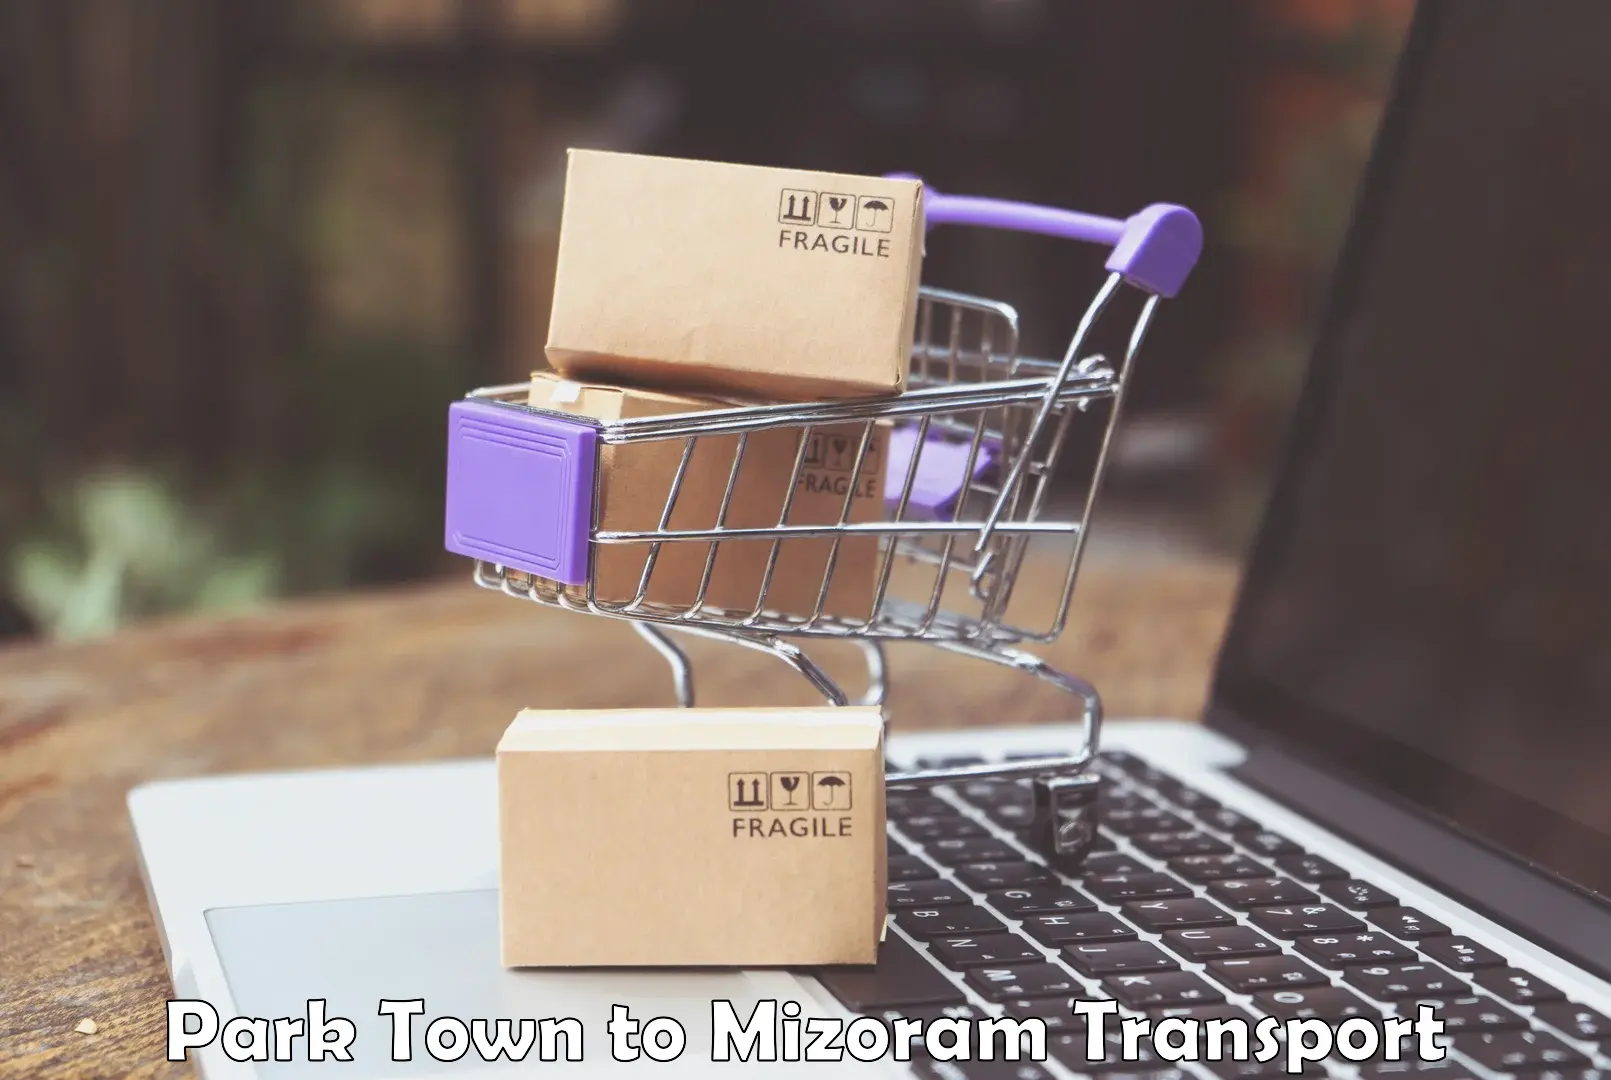 Container transport service Park Town to Mizoram